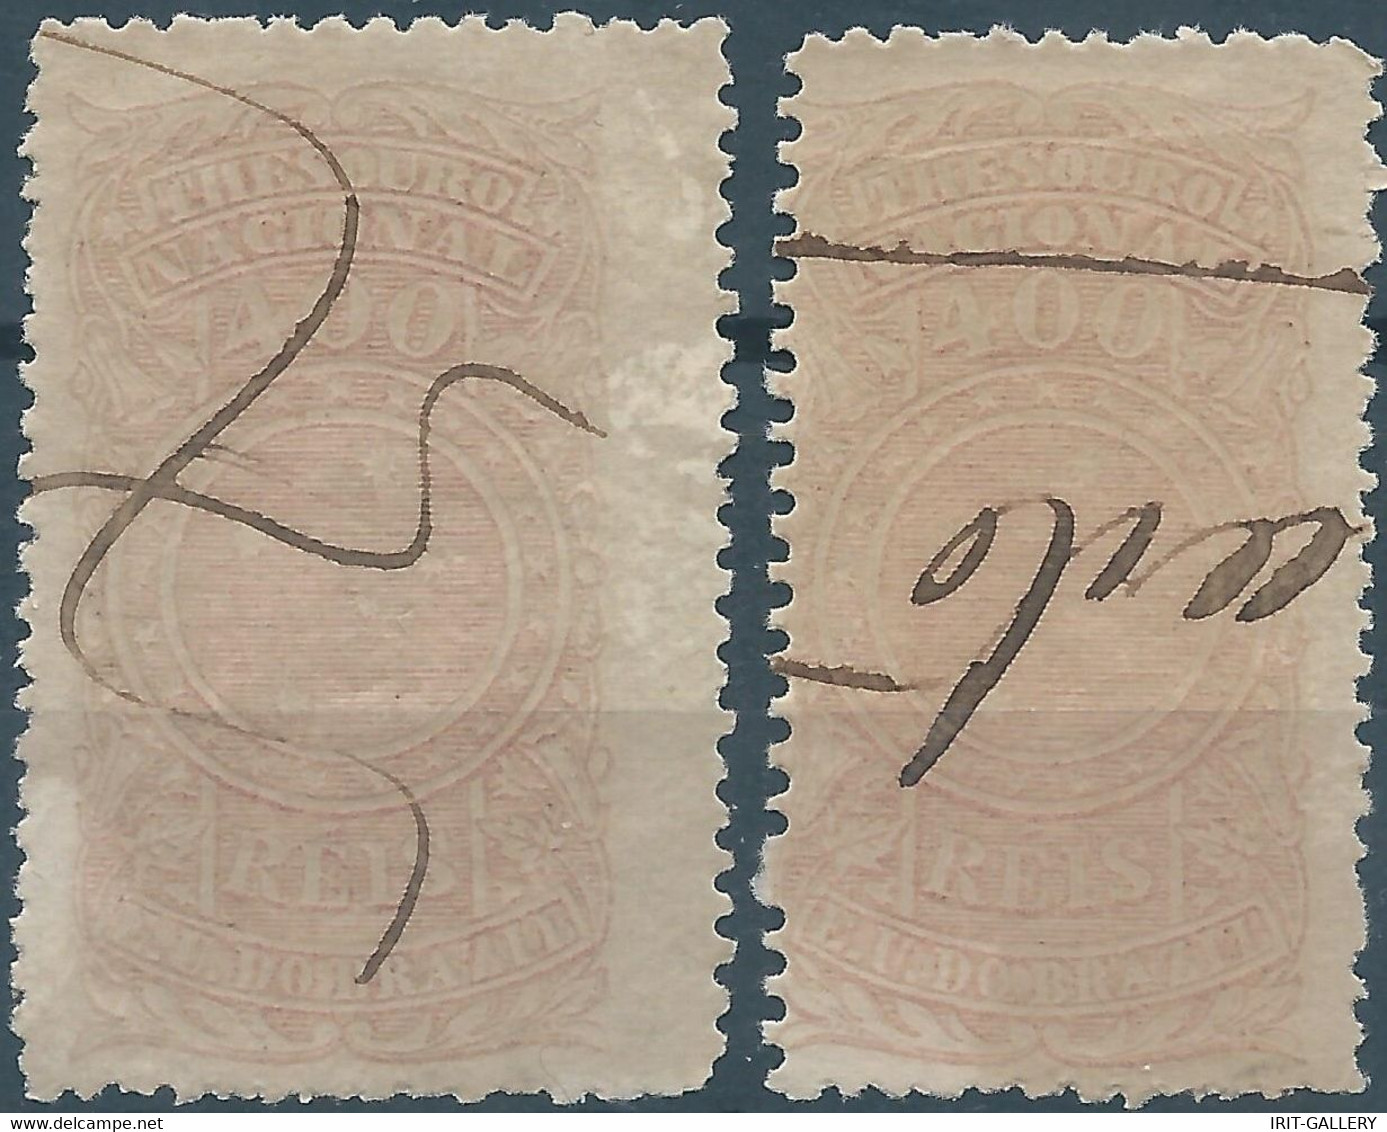 Brasil - Brasile - Brazil,Revenue Stamp Tax Fiscal,National Treasure,2x400R,different In The Margin , Used - Officials